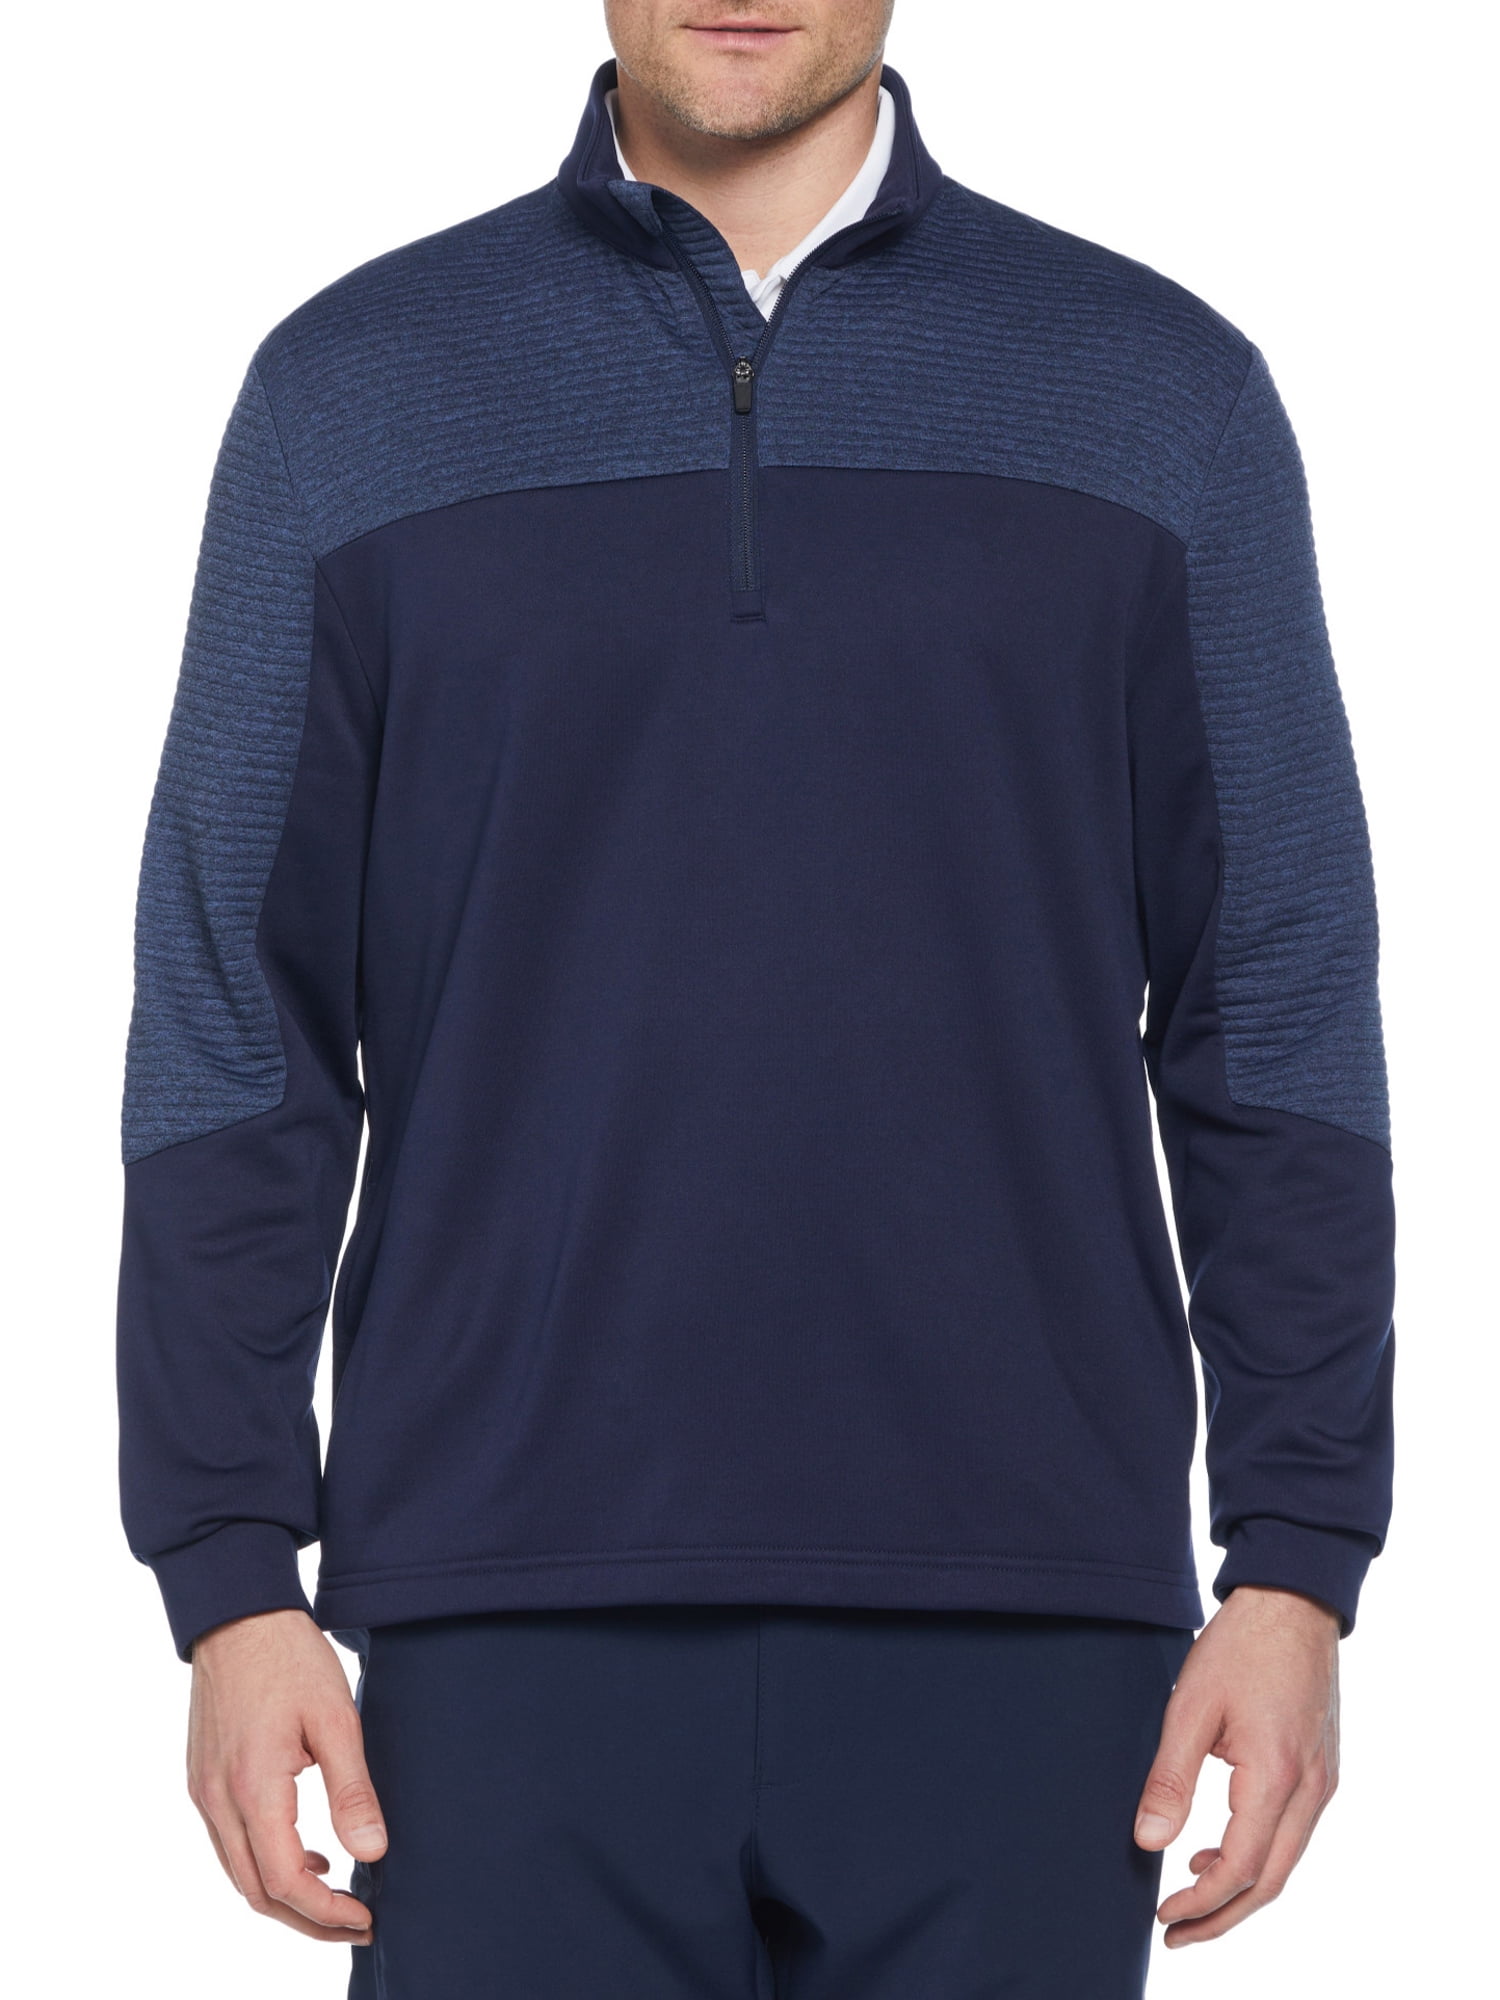 Athletic Works Men's and Big Men's Fusion Knit Jacket, Sizes S-3XL